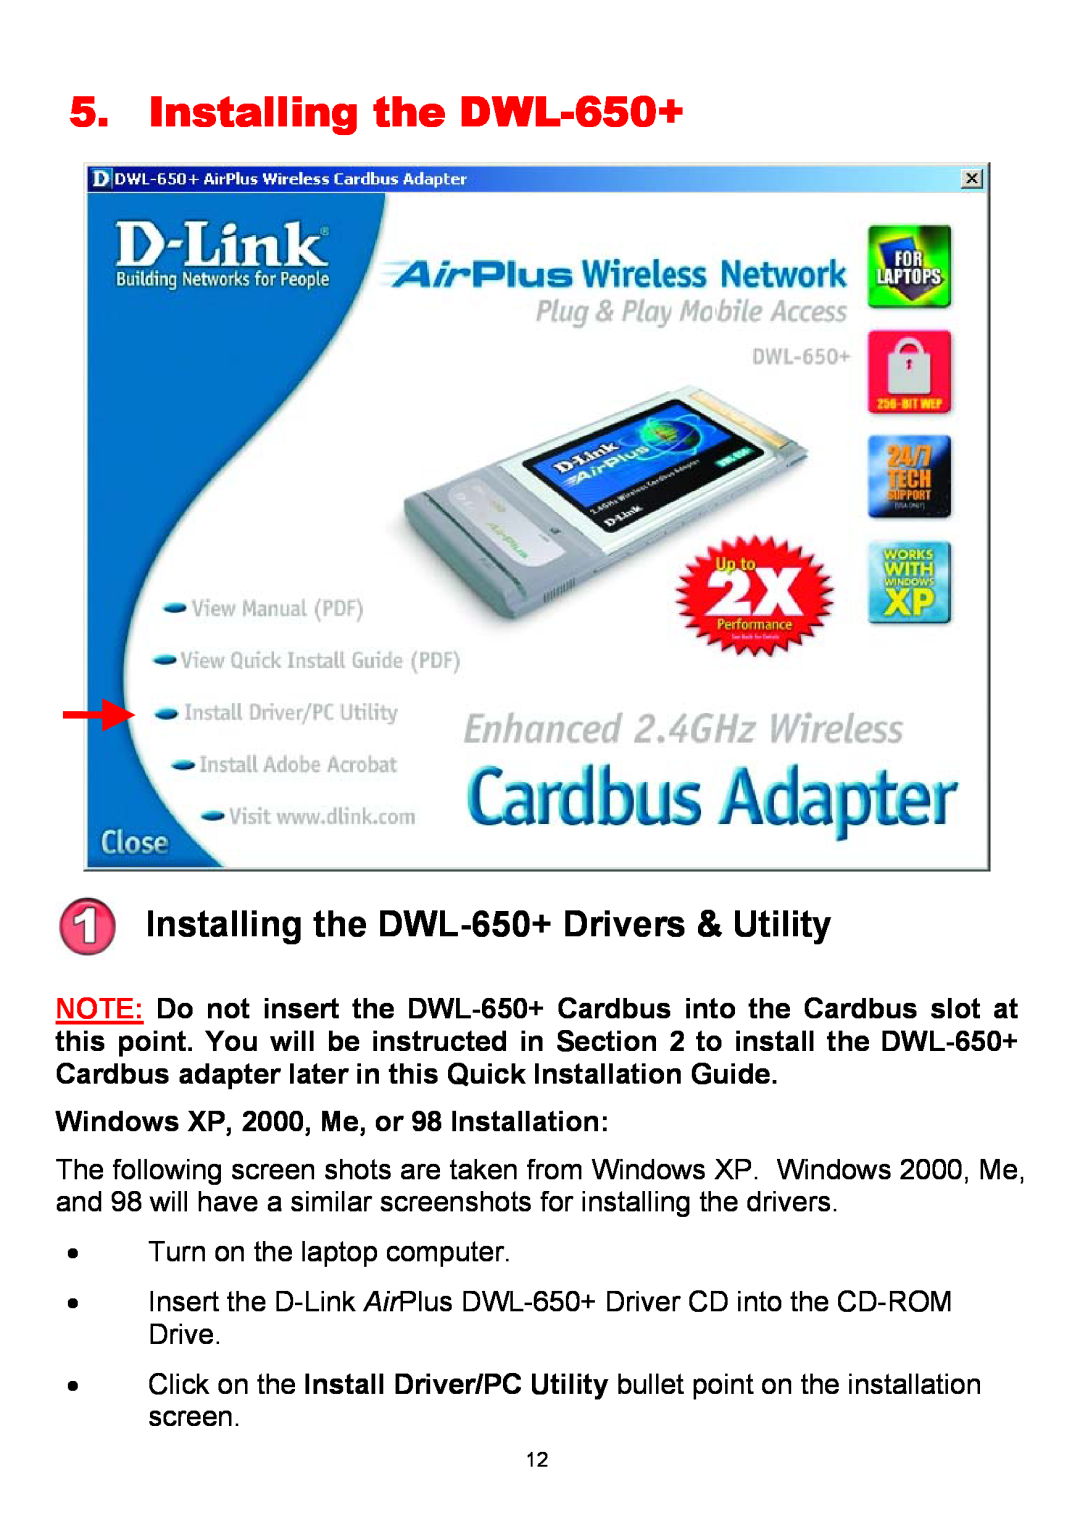 D-Link manual Installing the DWL-650+ Drivers & Utility, Windows XP, 2000, Me, or 98 Installation 